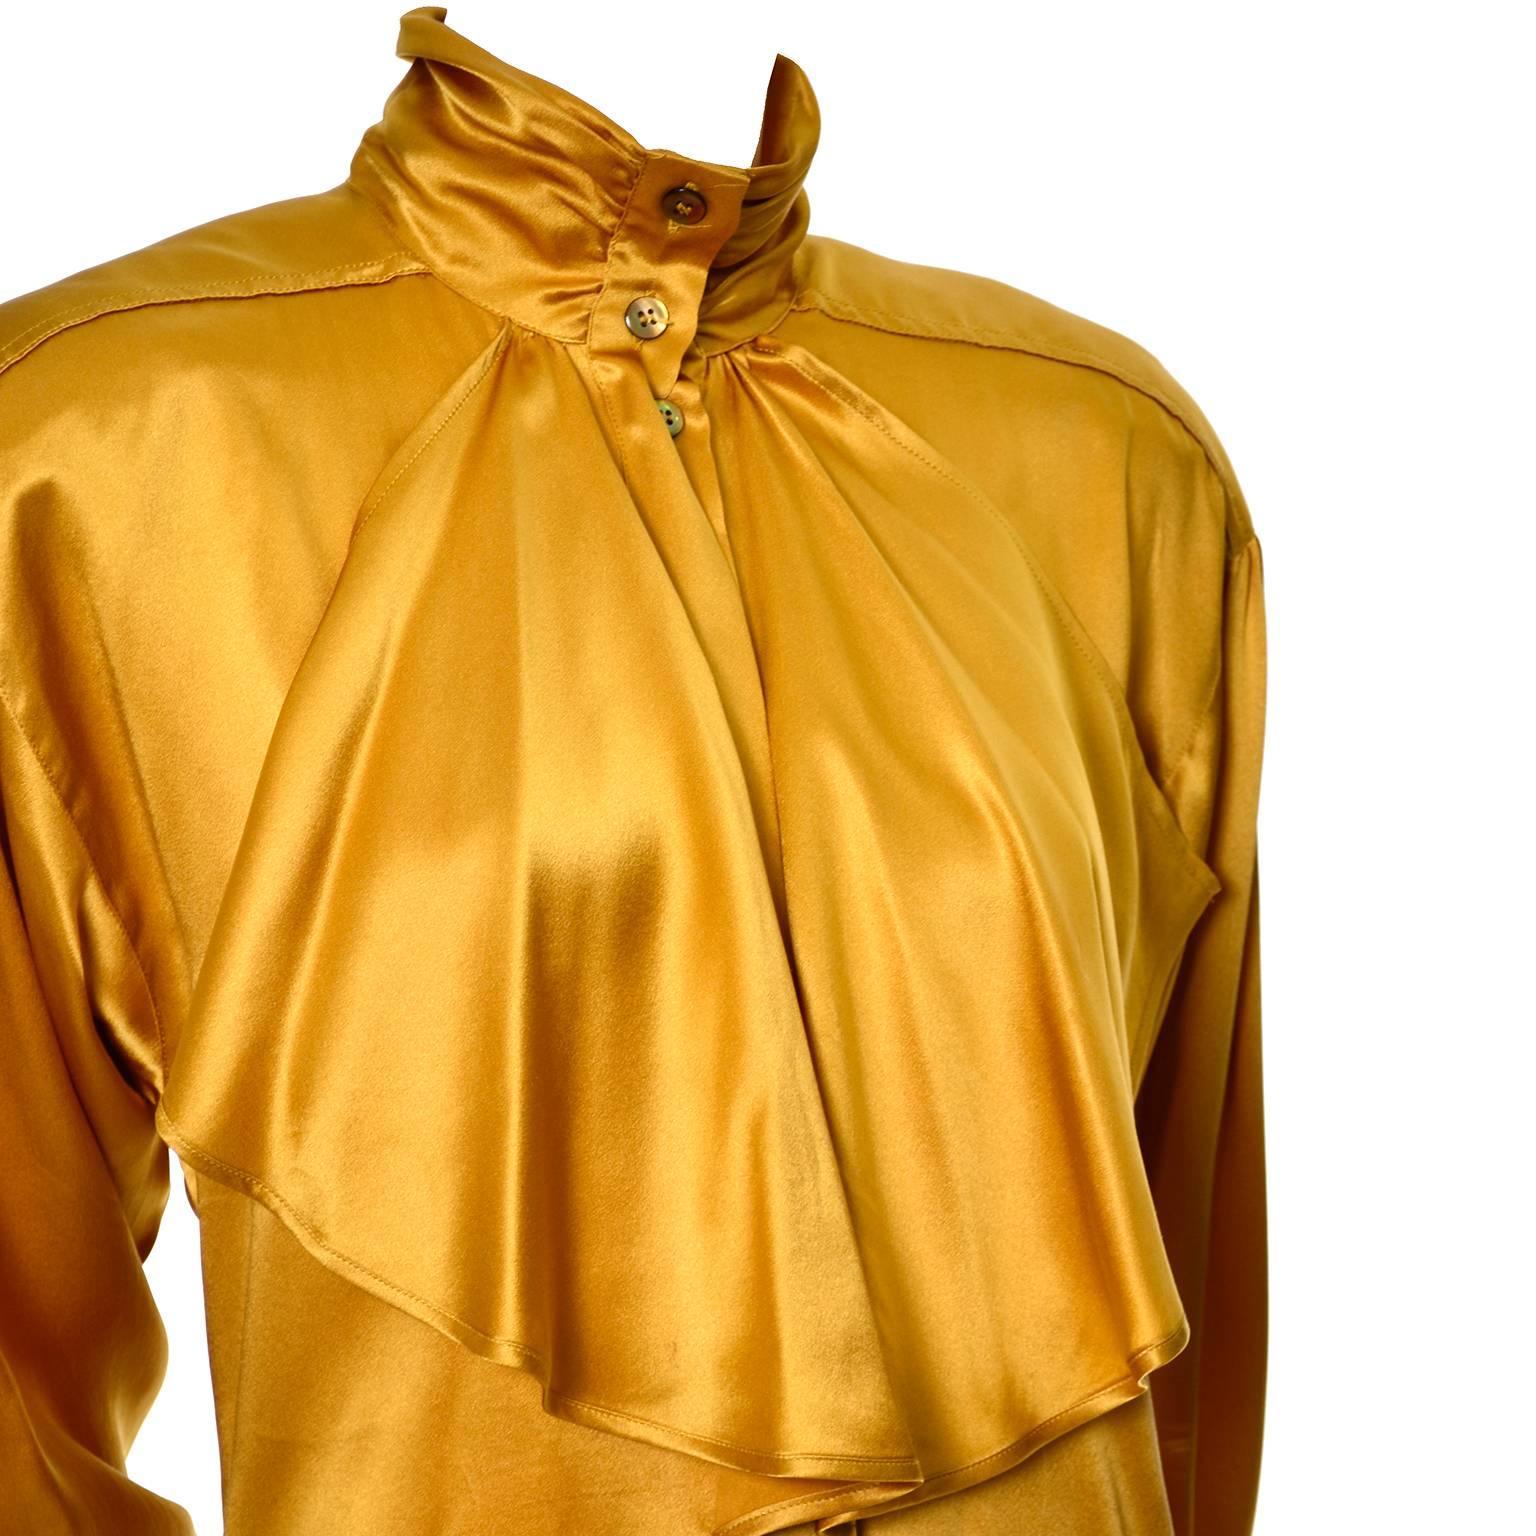 This luxurious gold silk blouse from Escada is from the 1980’s and is labeled a European size 36.  The blouse has beautiful gathered bishop sleeves that drape a little off from the shoulders with slight shoulder pads, and a pleated high button